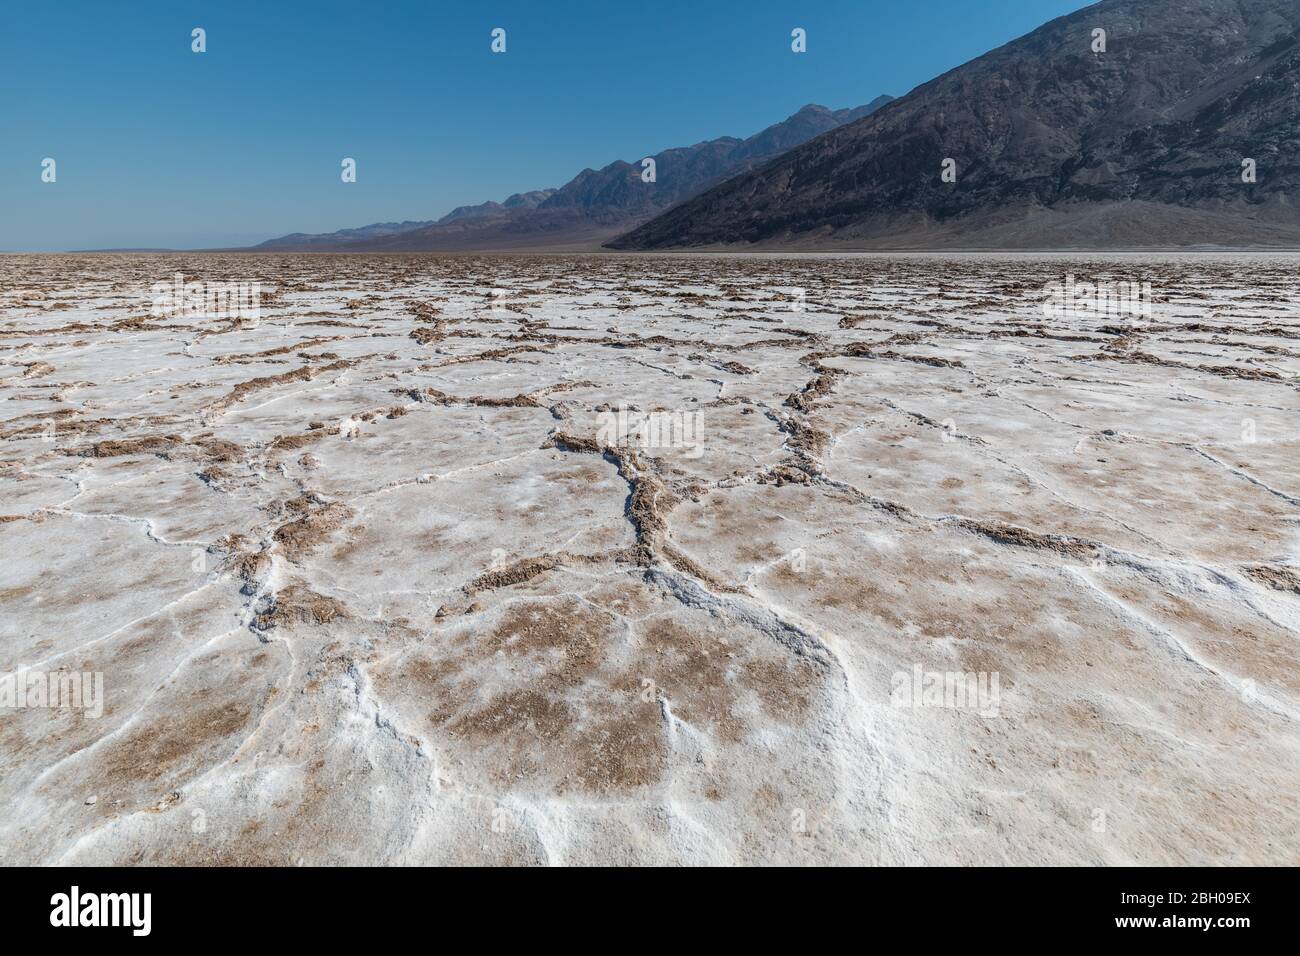 Low angle shot of the salt lake in Badwater Basin, Death Valley, with mountains in the distance Stock Photo